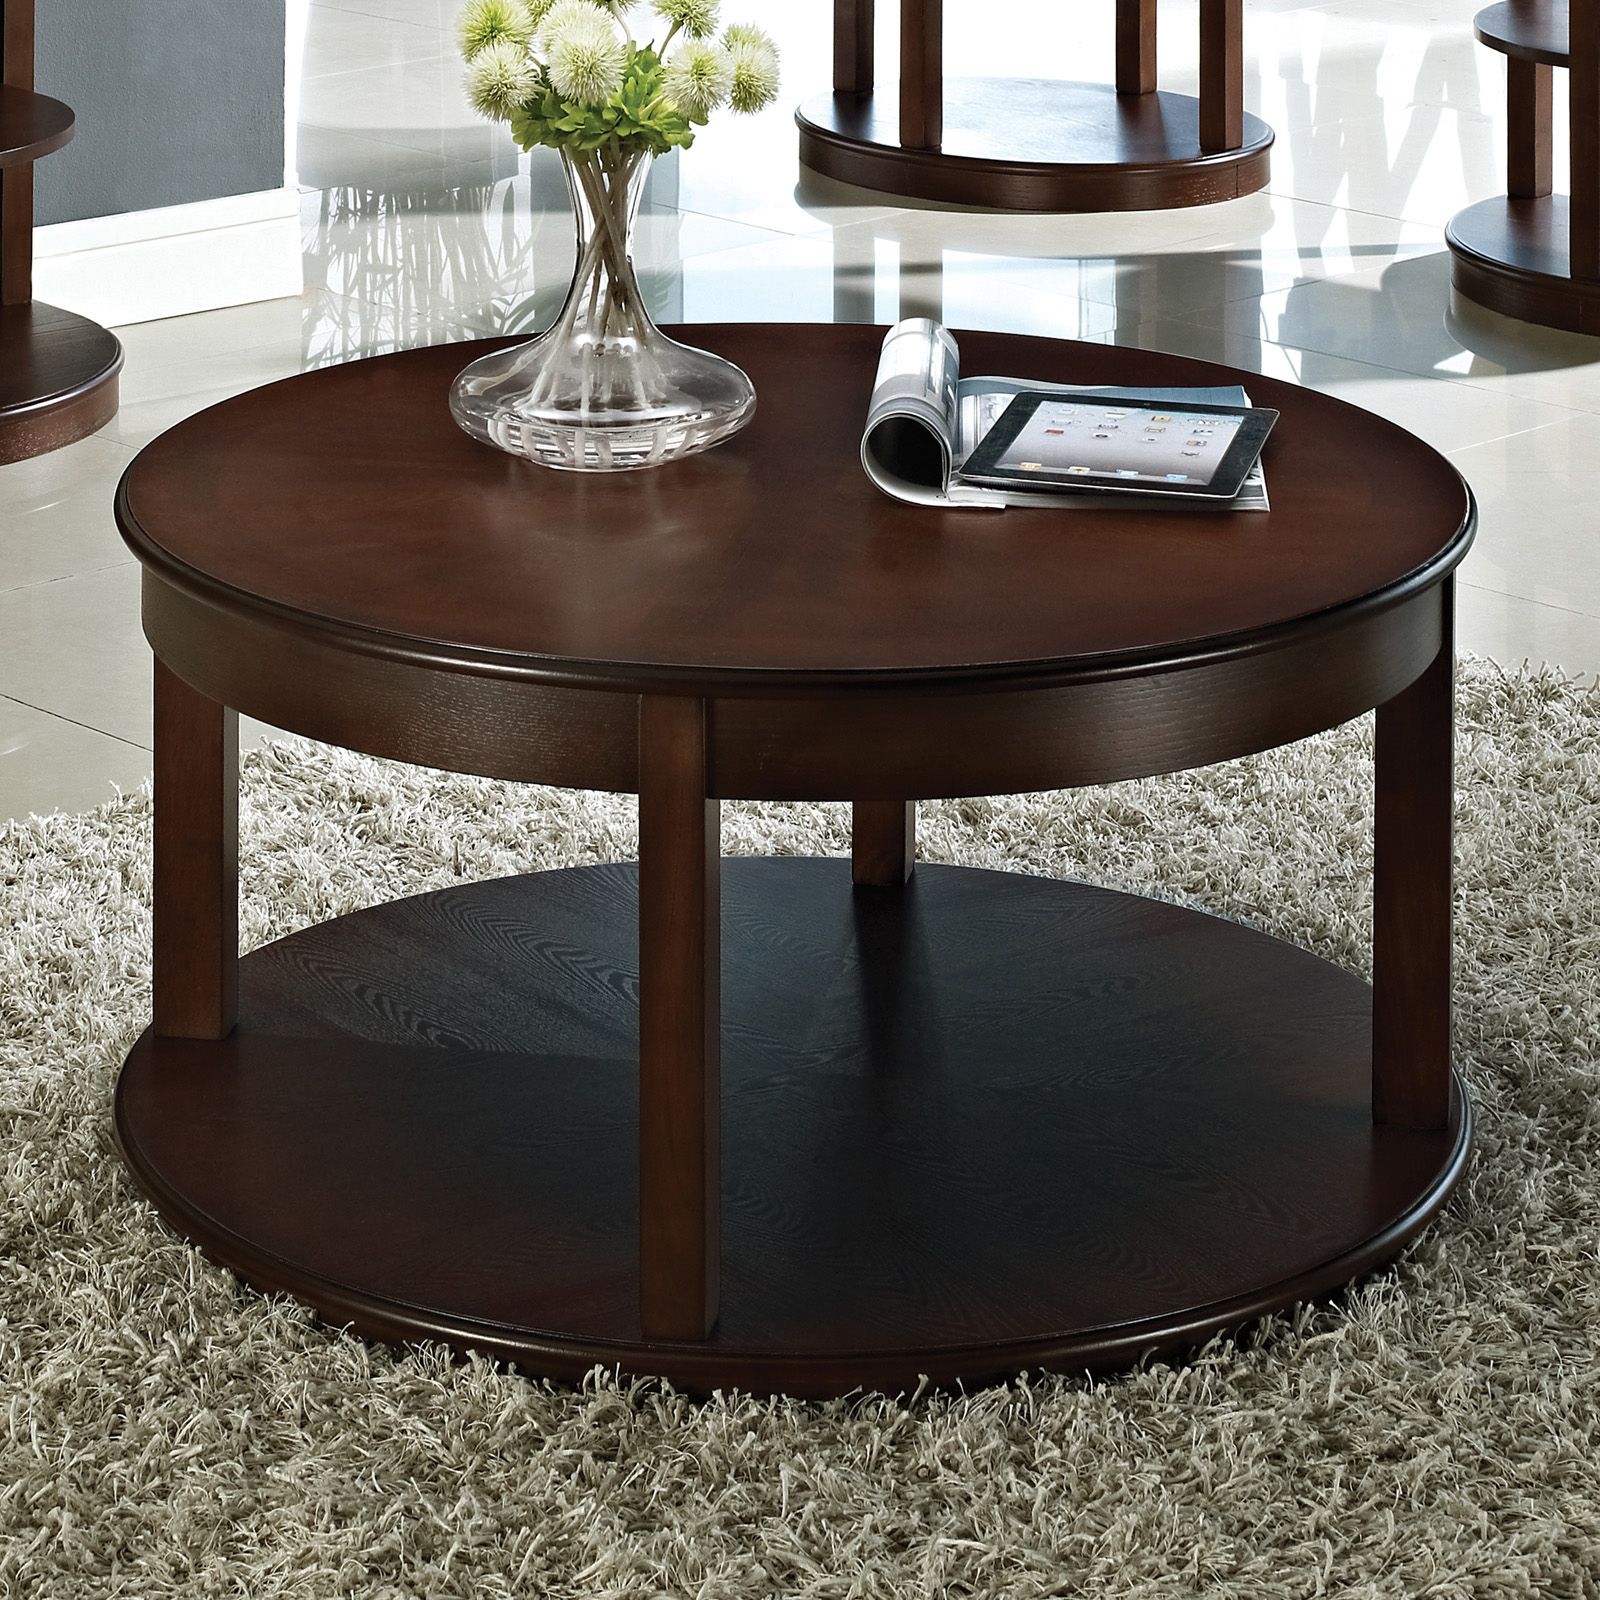 Fashionable Steve Silver Crestview Round Espresso Wood Spinning Coffee Table At With Regard To Silver Coffee Tables (View 9 of 10)